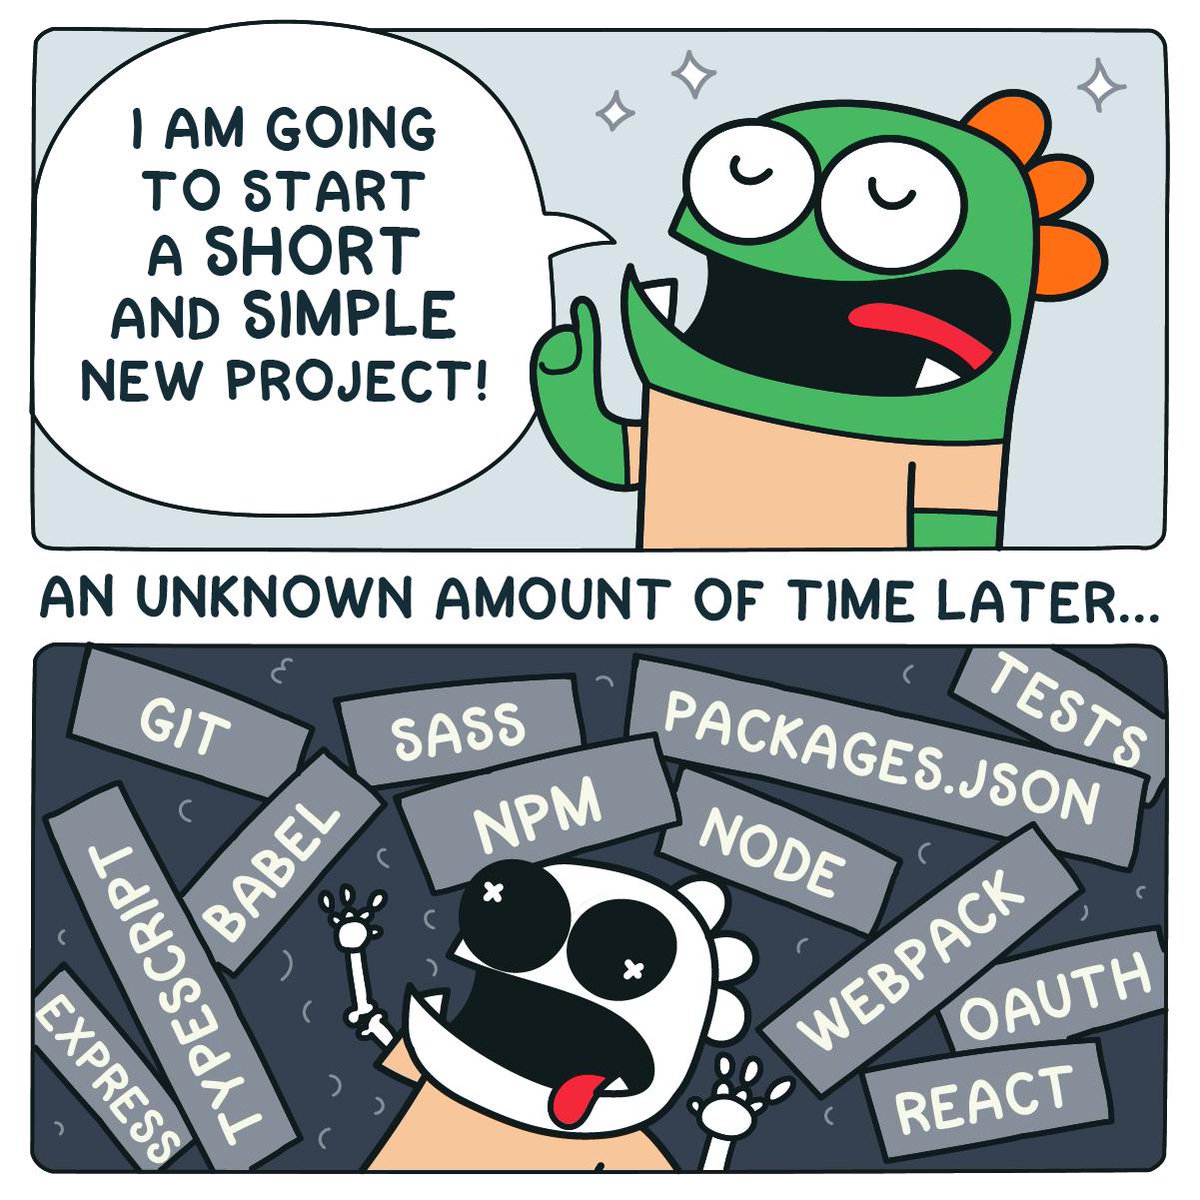 Comic with two panes, first a protagonist eagerly declaring they will start a short simple project, second an unknown time later the protagonist is overwhelmed by a plethora of tools, frameworks, technologies